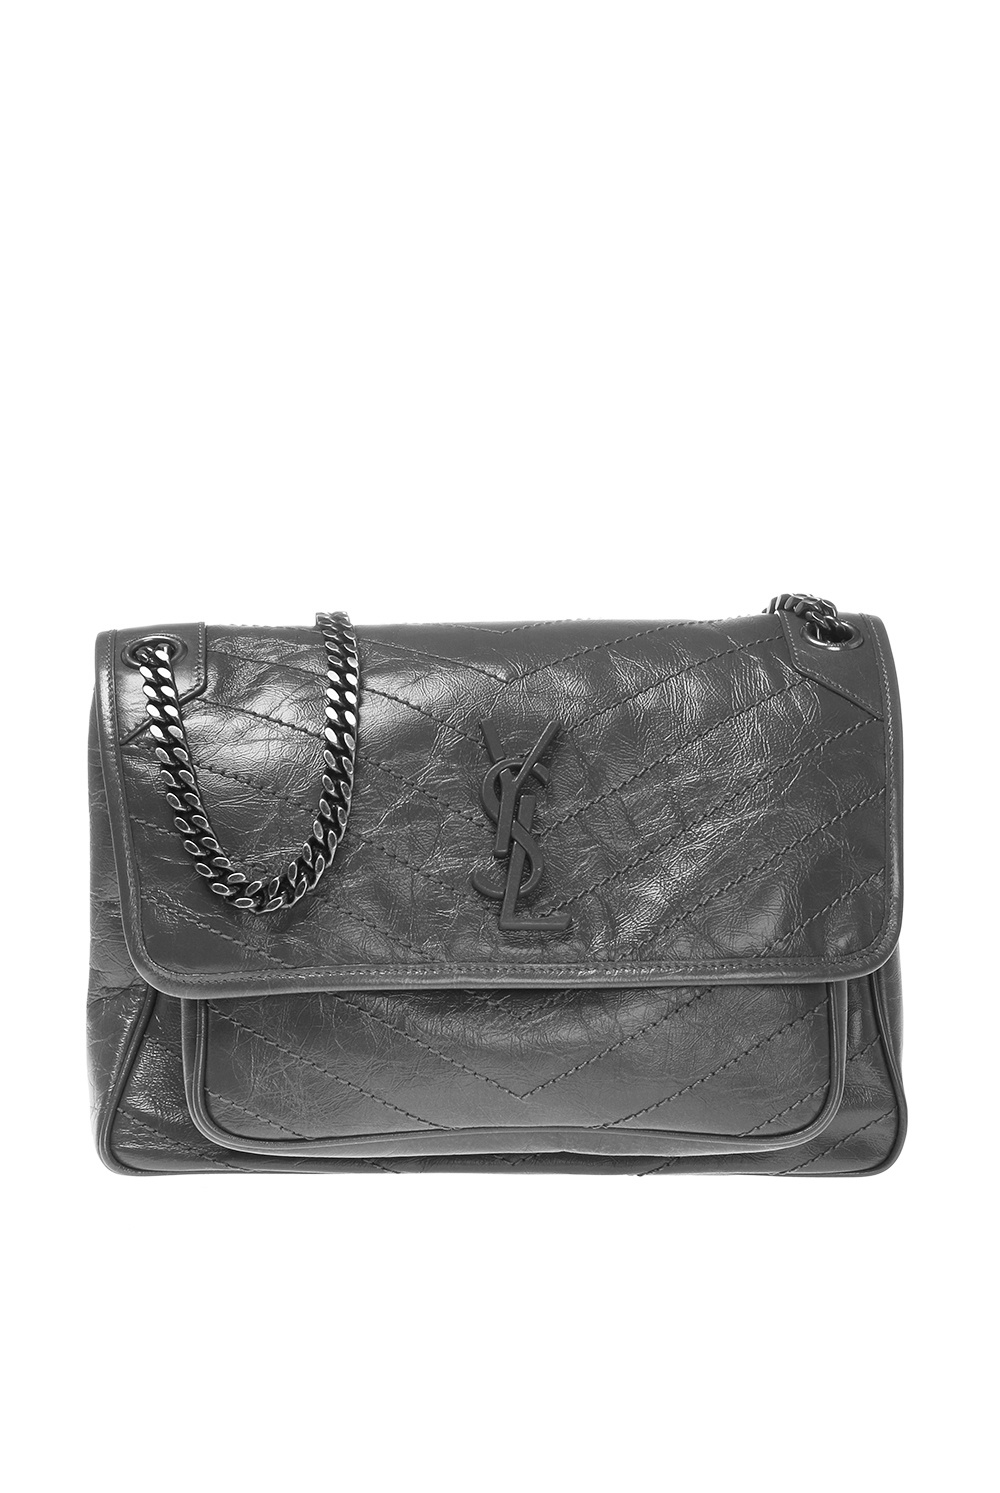 Saint Laurent Uptown Baby Textured-leather Pouch - Black - One Size